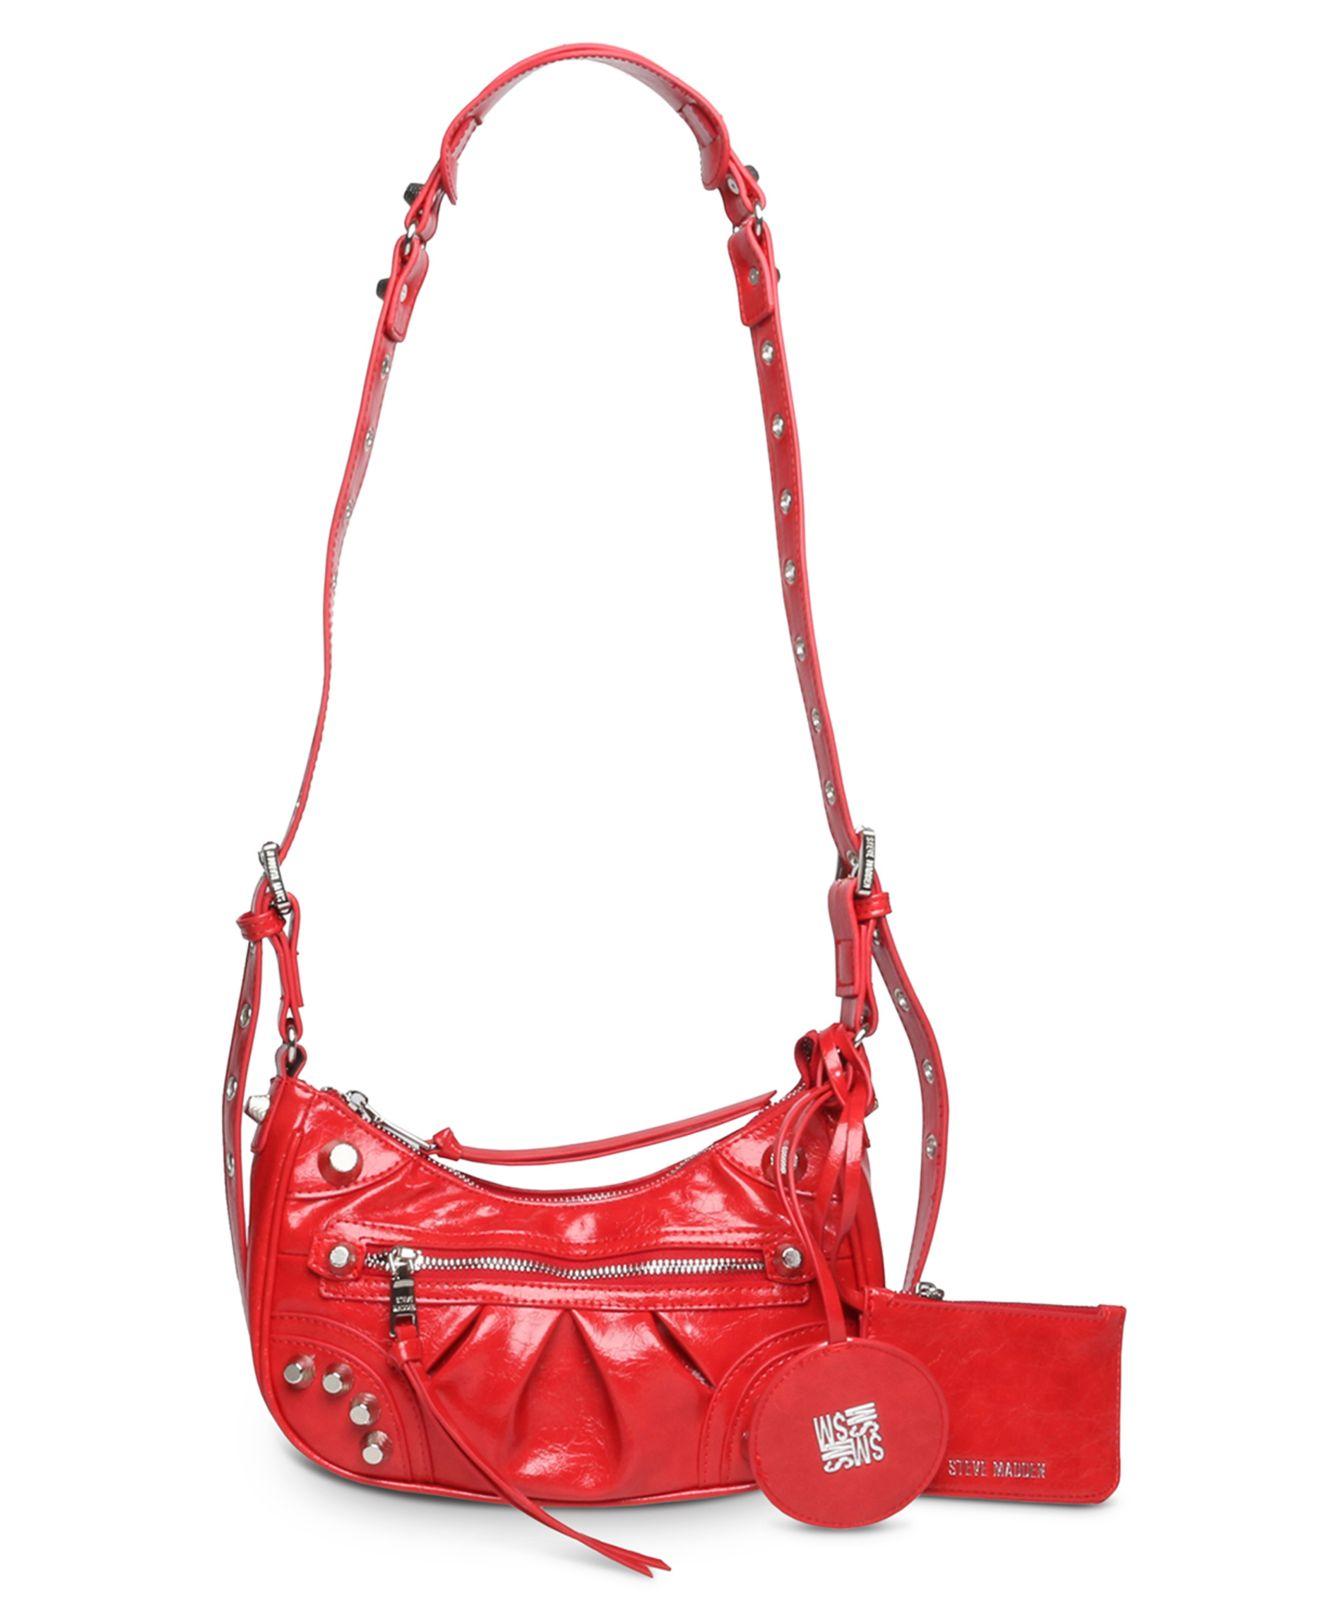 Steve Madden Synthetic Bglowing Crossbody Bag in Red | Lyst